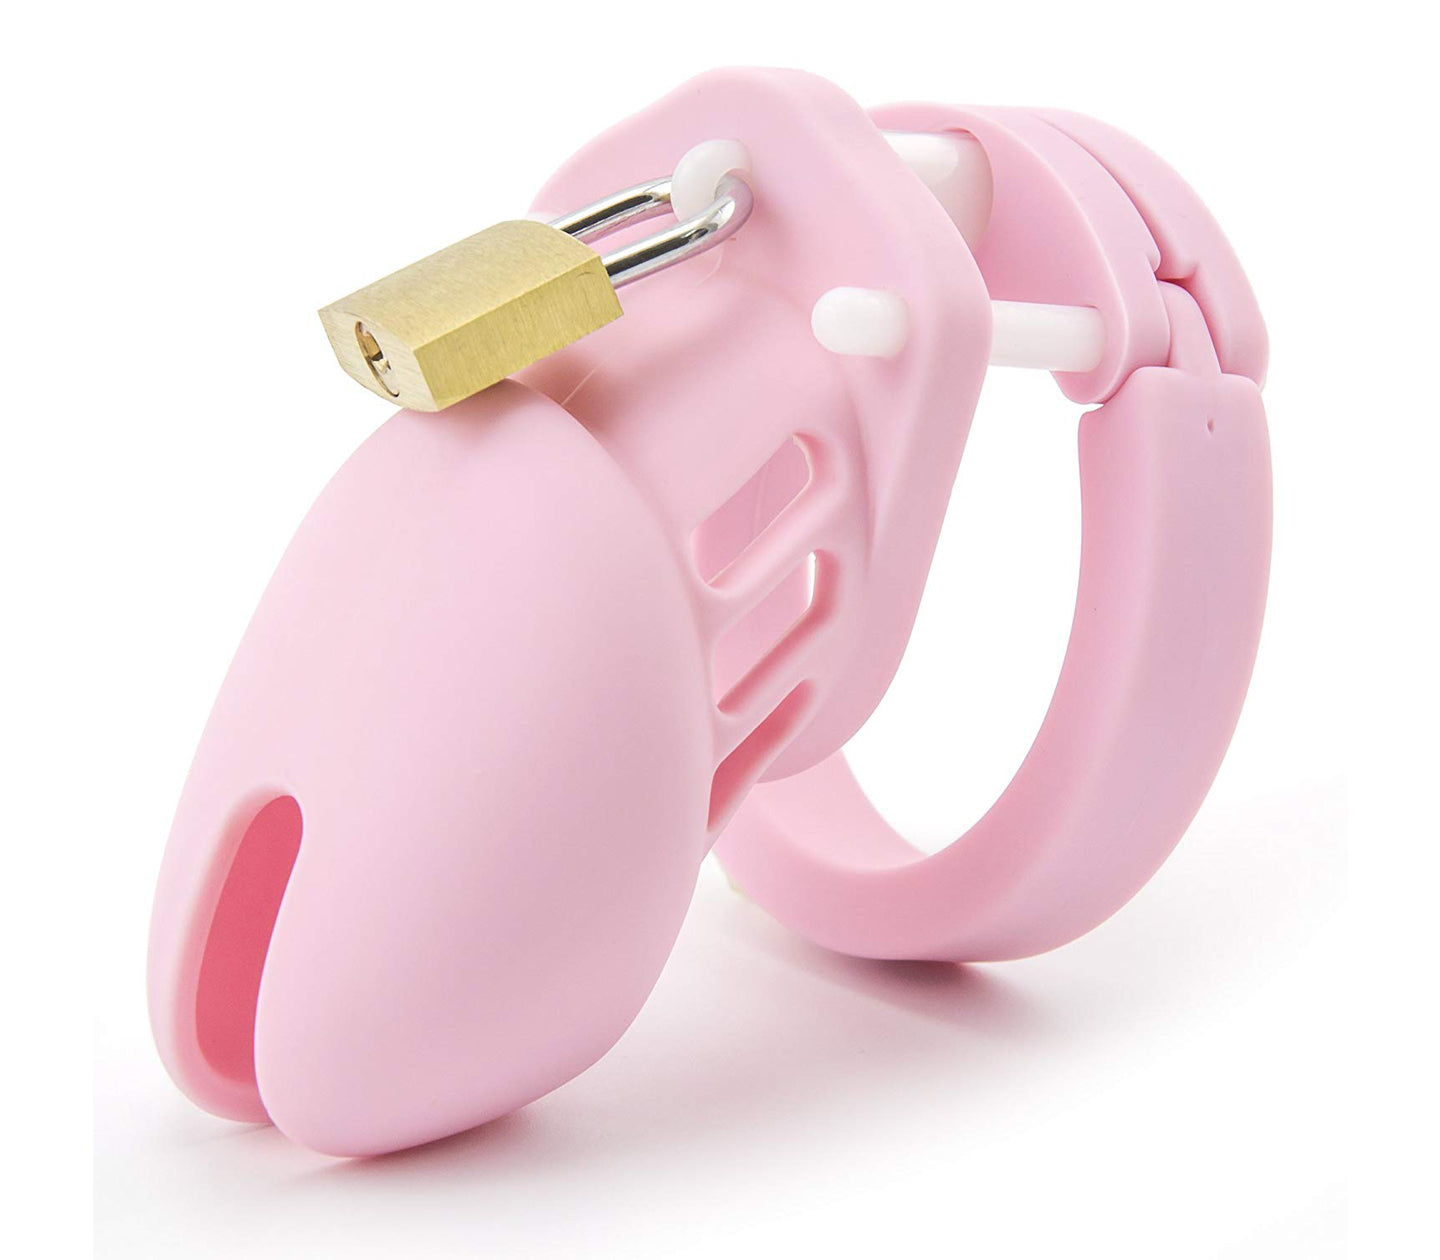 Lil Cockcage 009 Silicone Cock Cages W/ Interchangeable Rings Pink Short - Club X